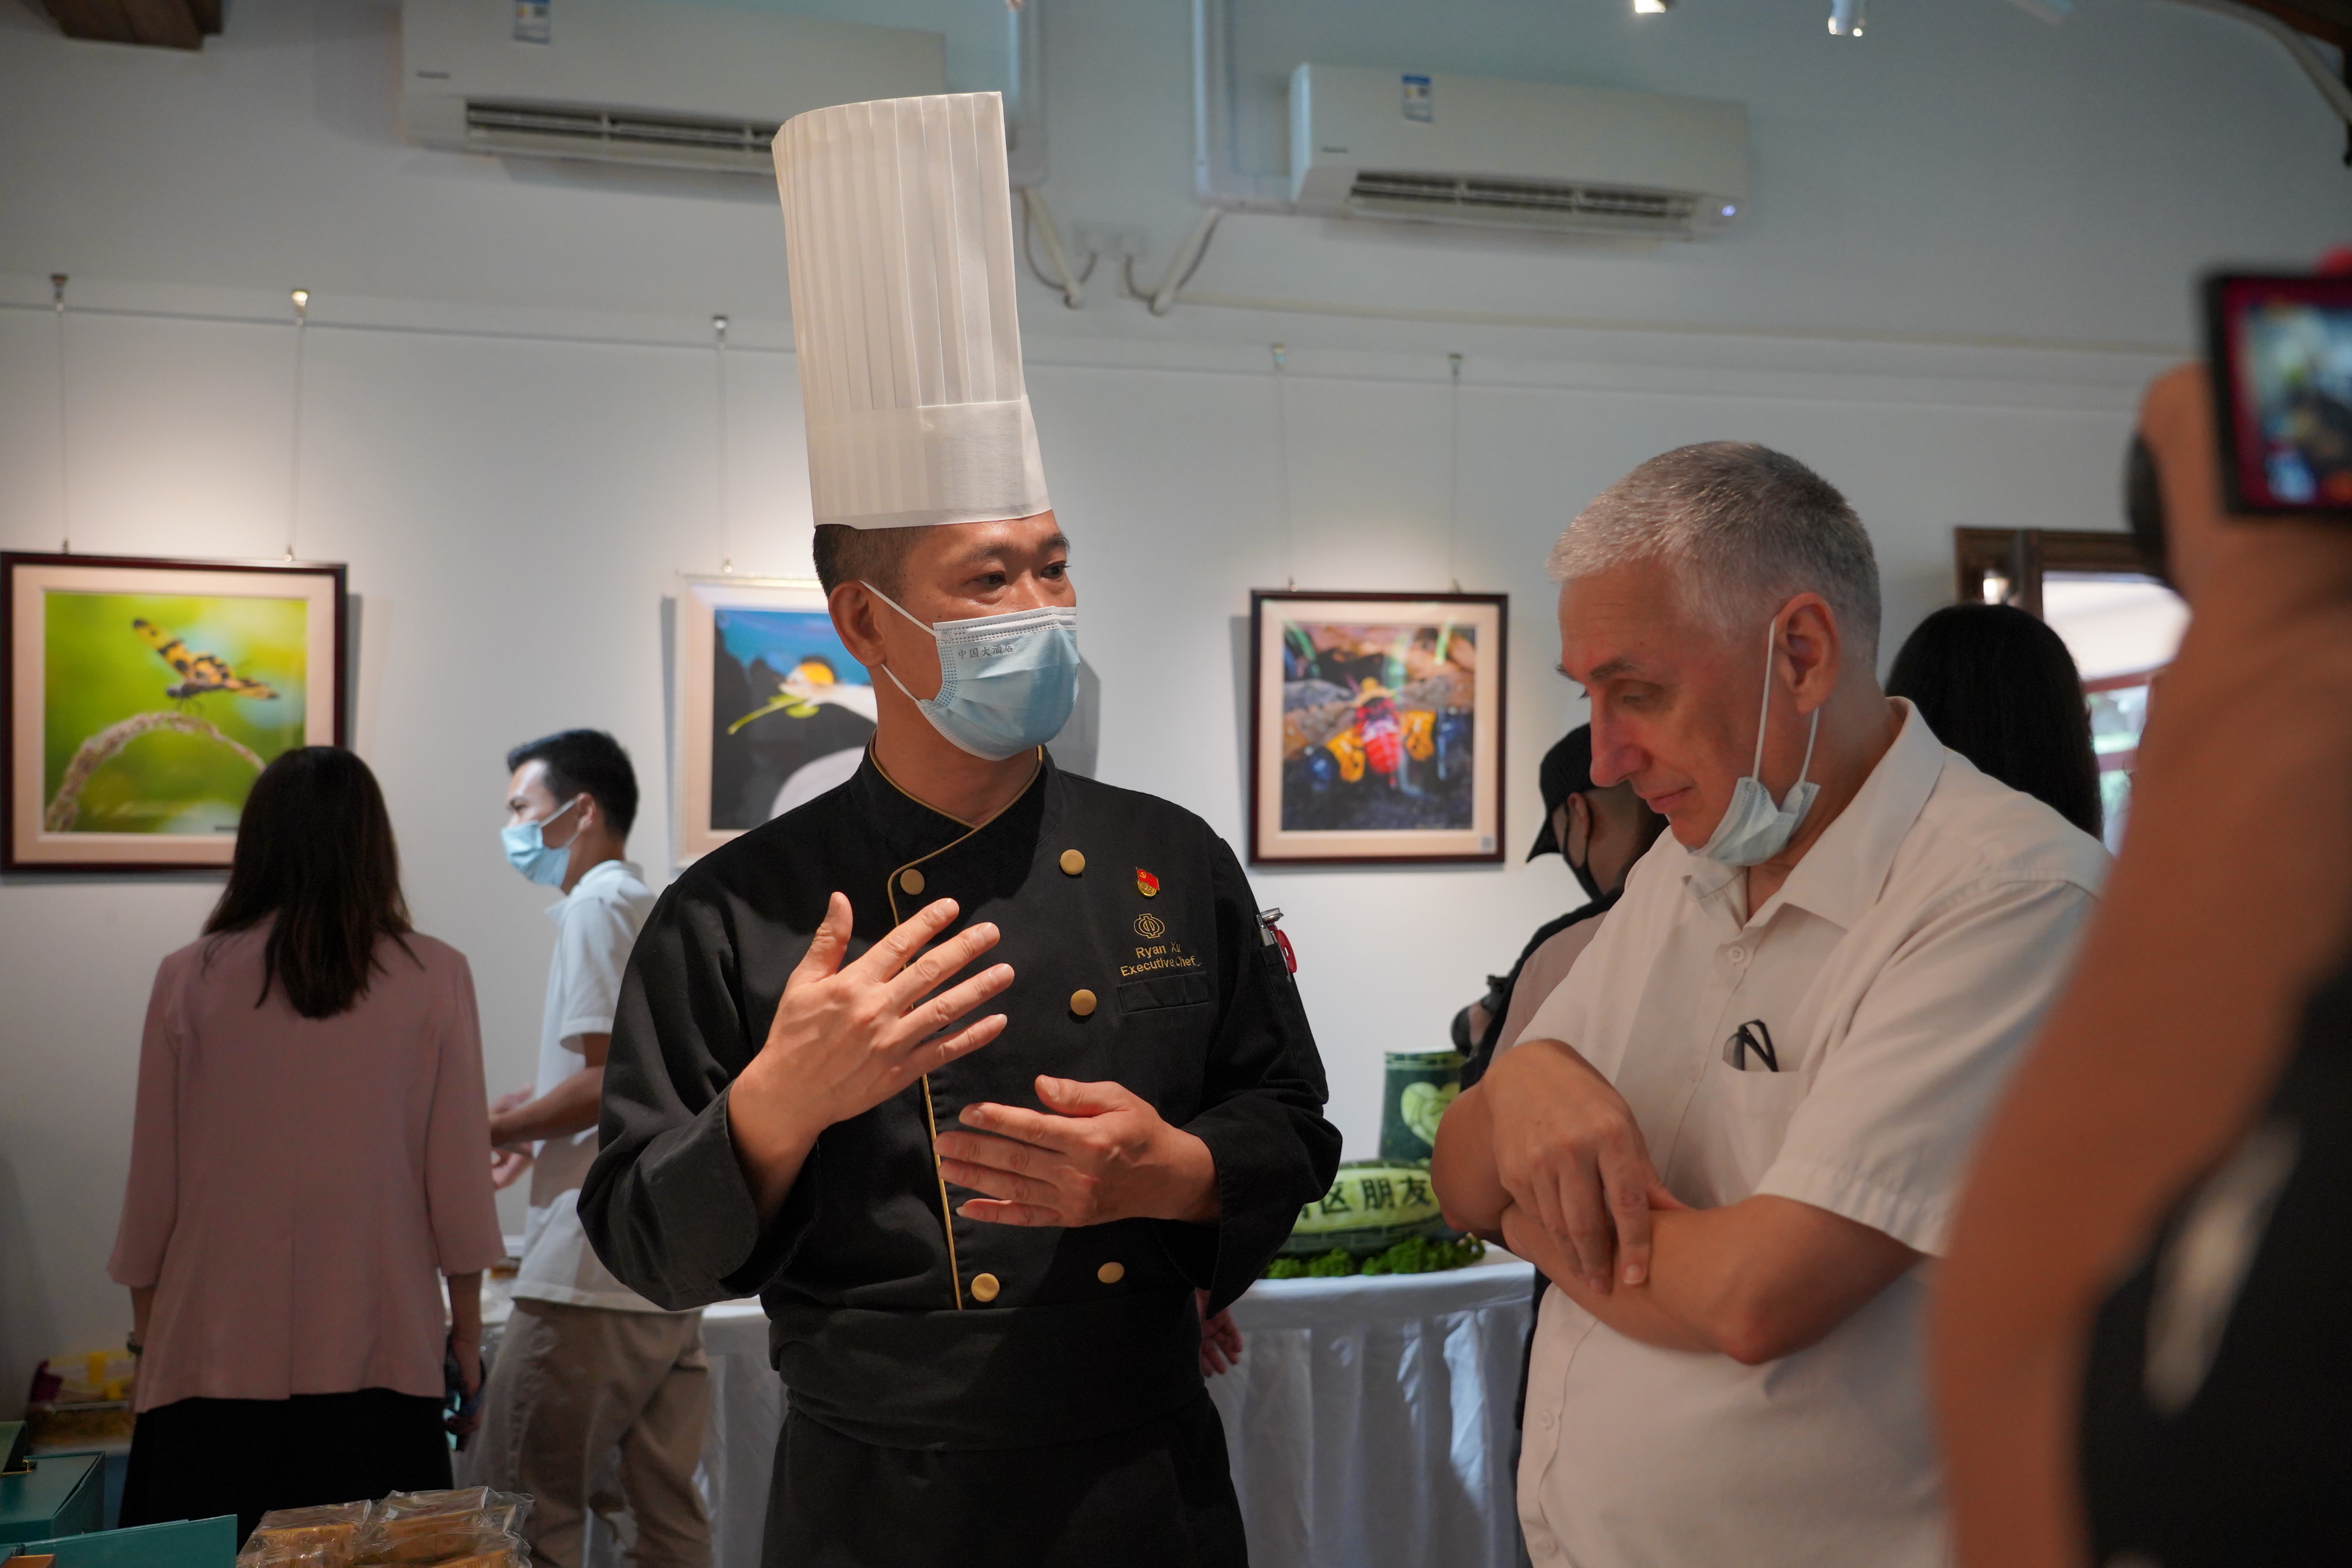 Expats celebrate Mid-Autumn Festival with Cantonese chefs in Guangzhou